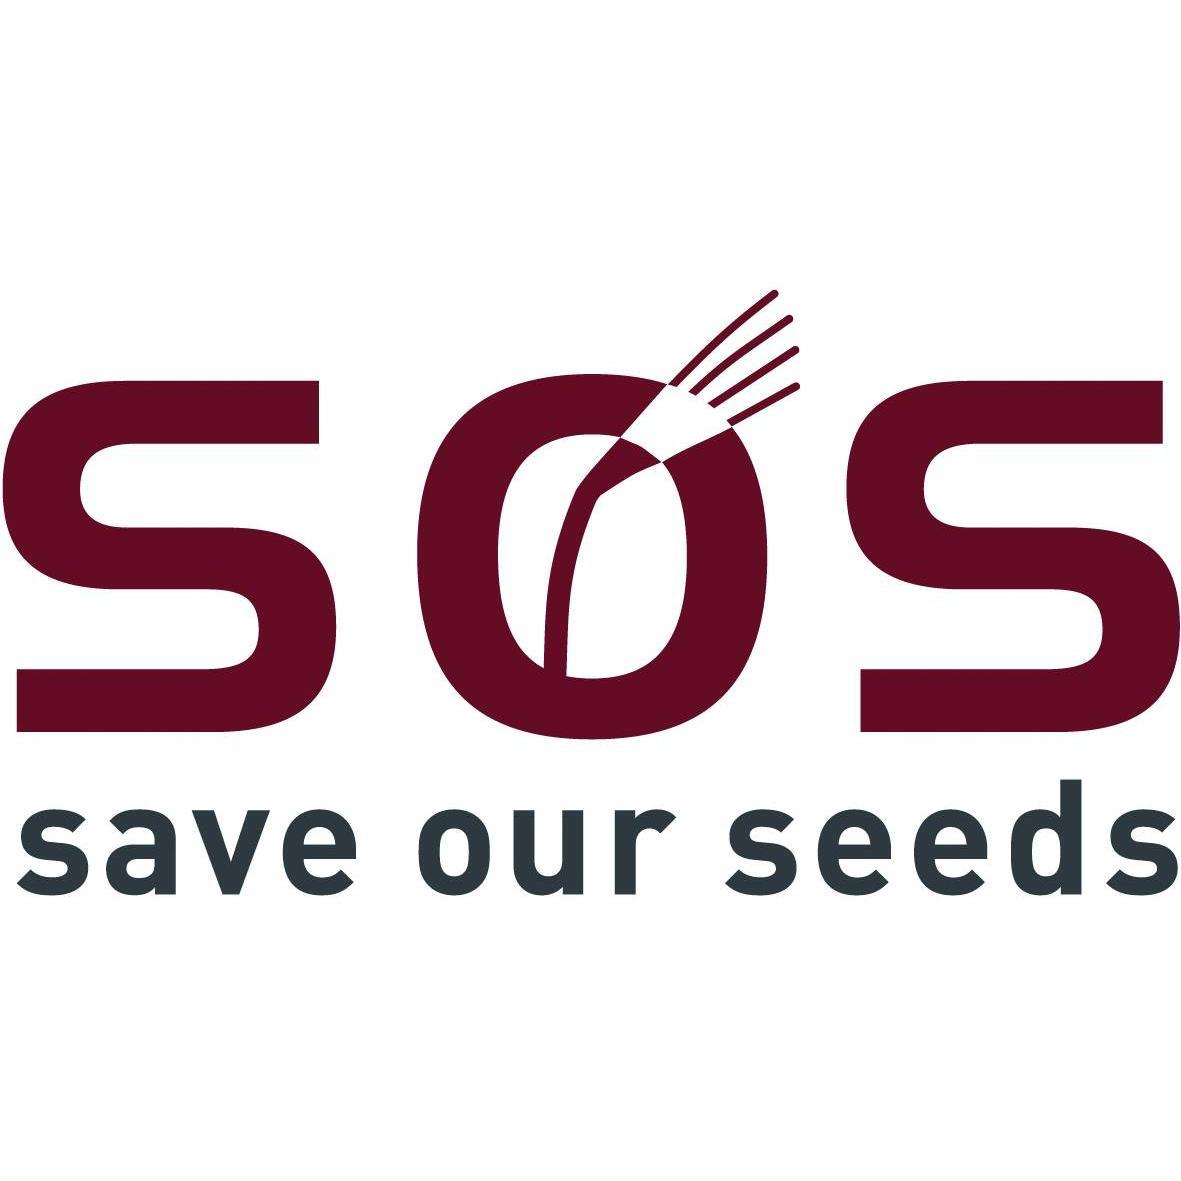 „Save Our Seeds“ is a European initiative promoting open exchange of gmo-free seeds and a global moratorium on Gene Drive Organisms.